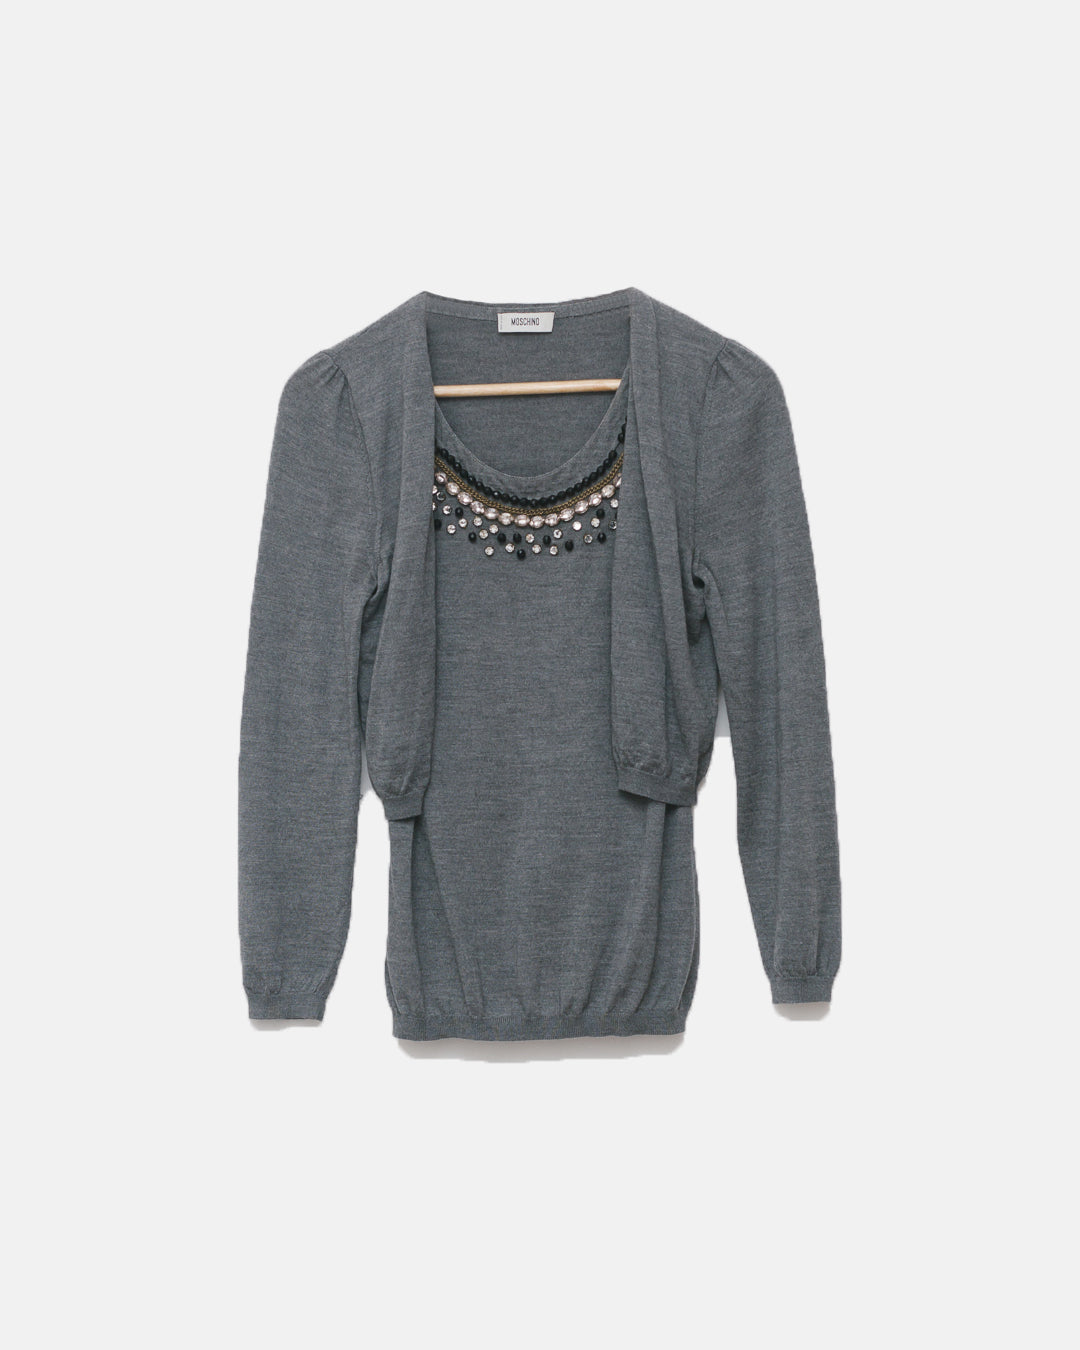 Moschino Embellished Knit Top